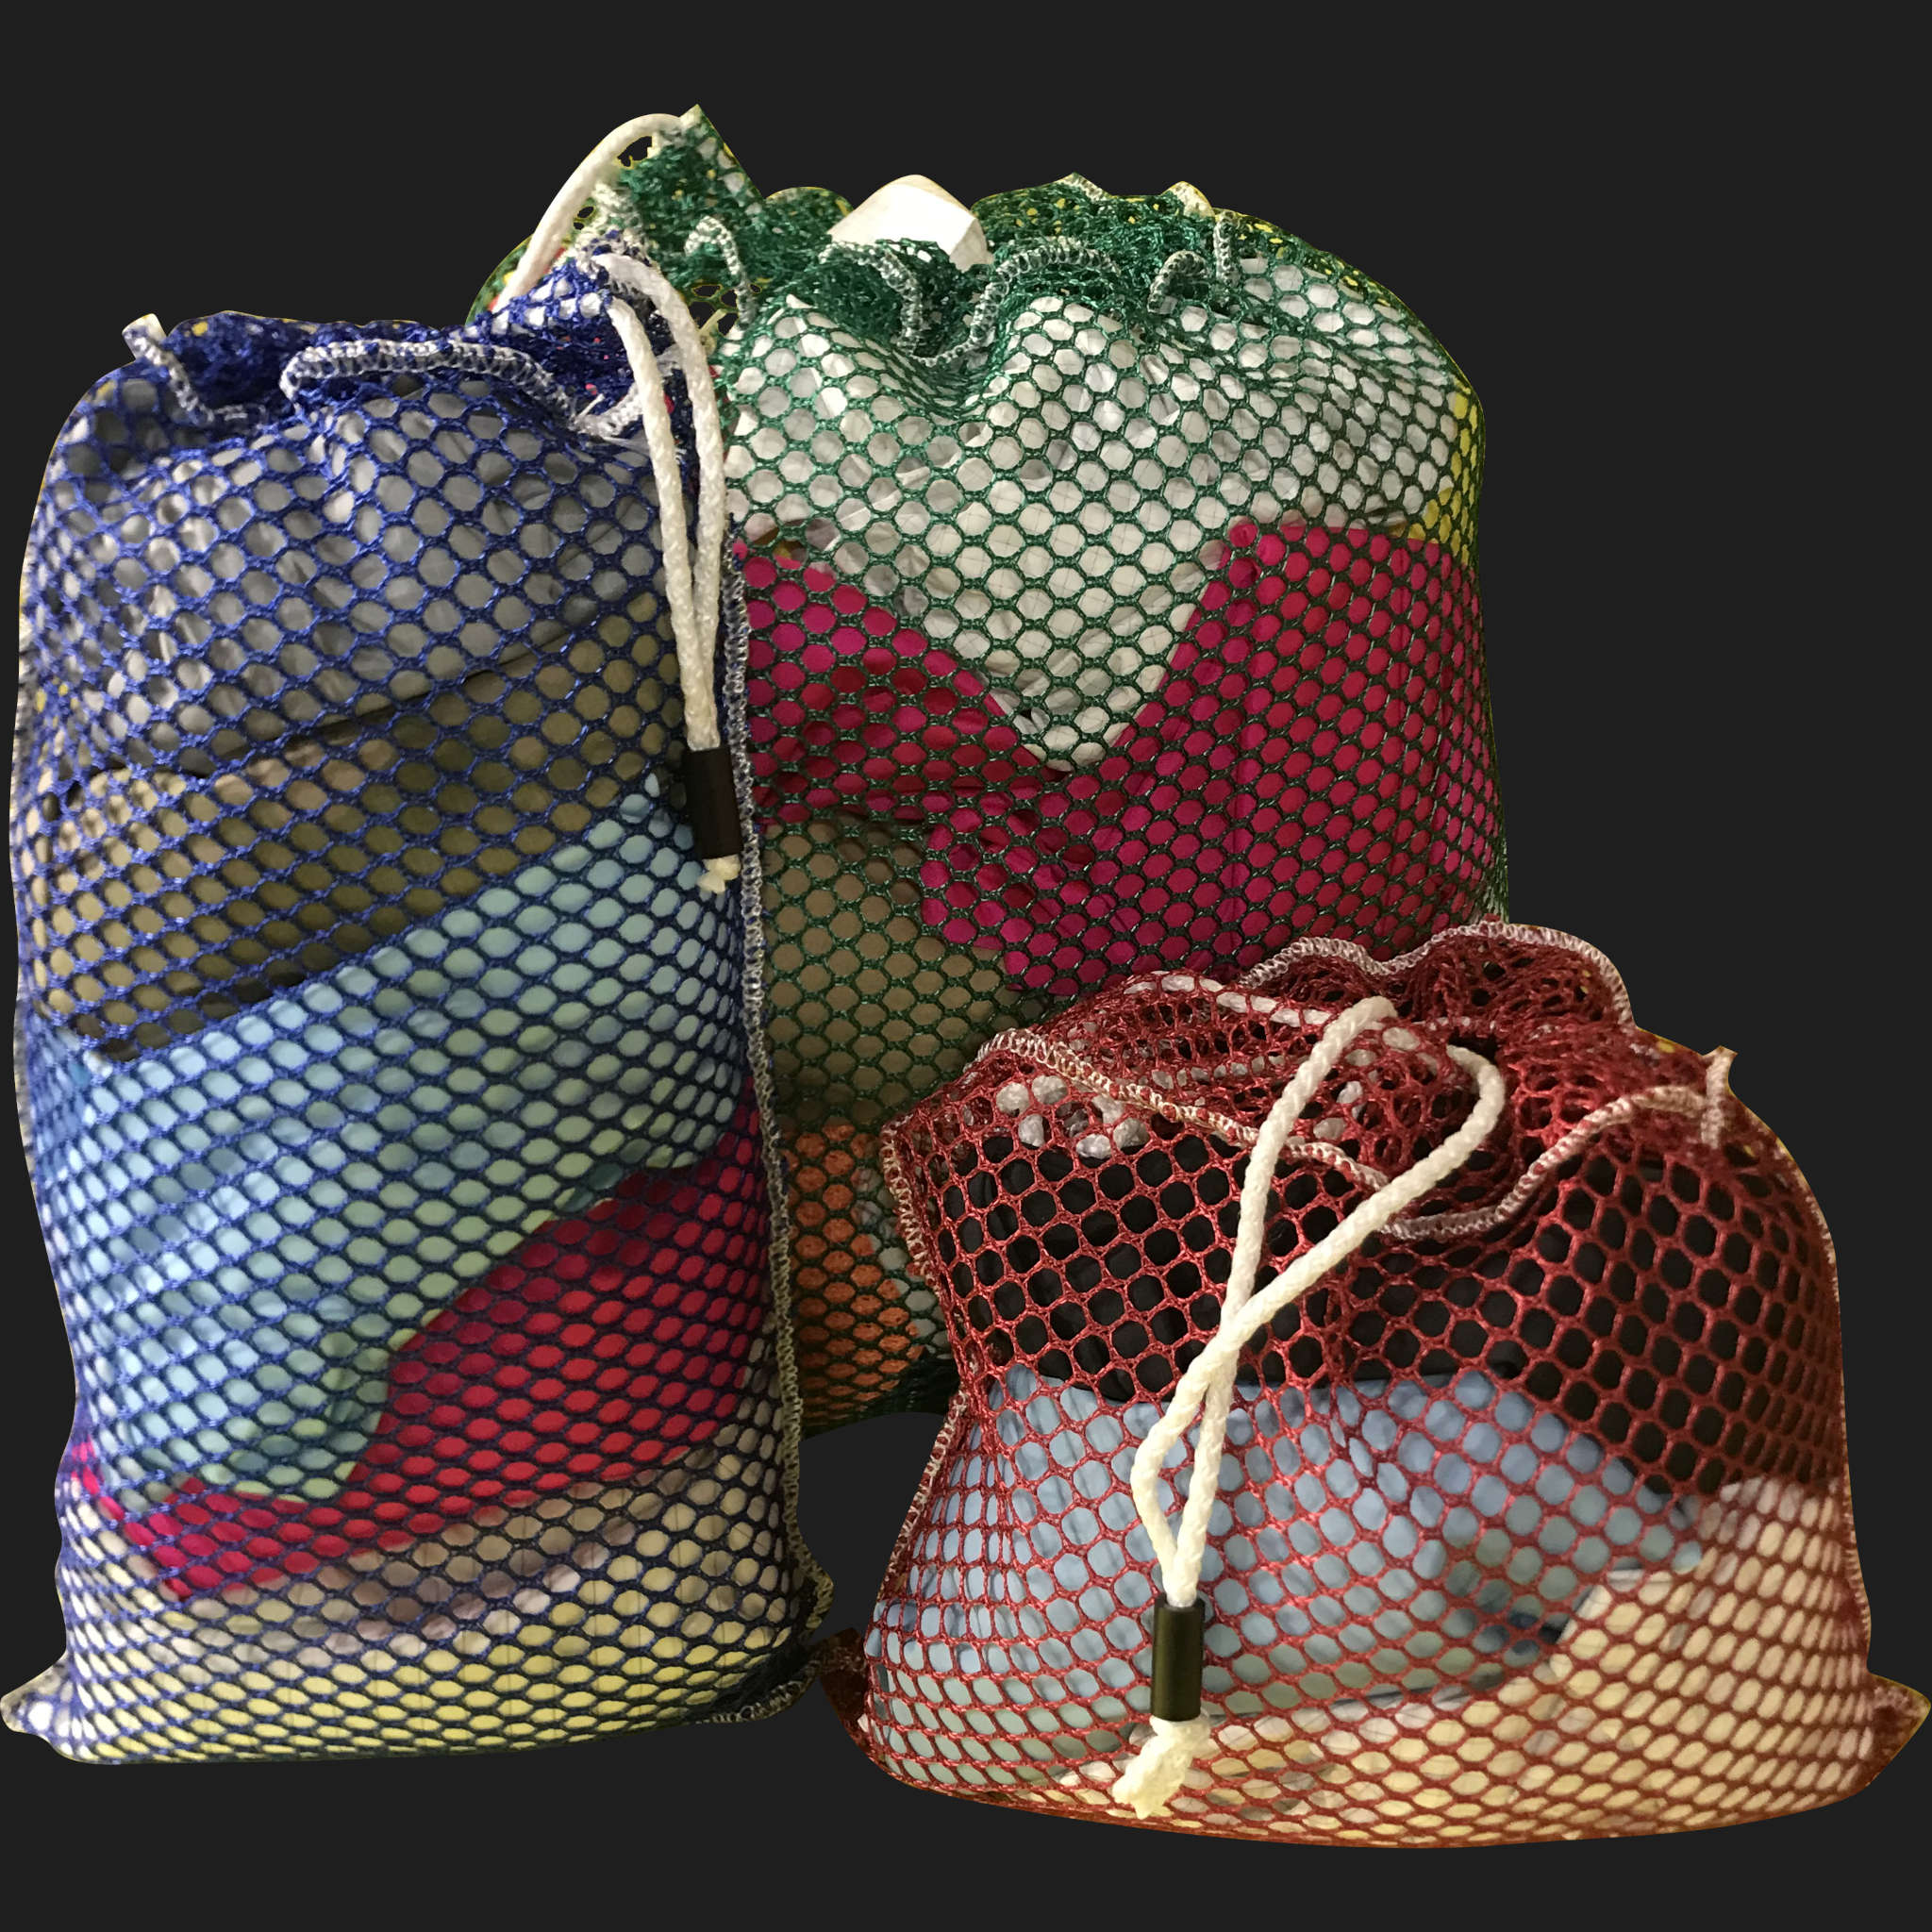 52" x 76" Customized Mesh-Net-Laundry Bags Heavy Duty with Cord and barrellock closure